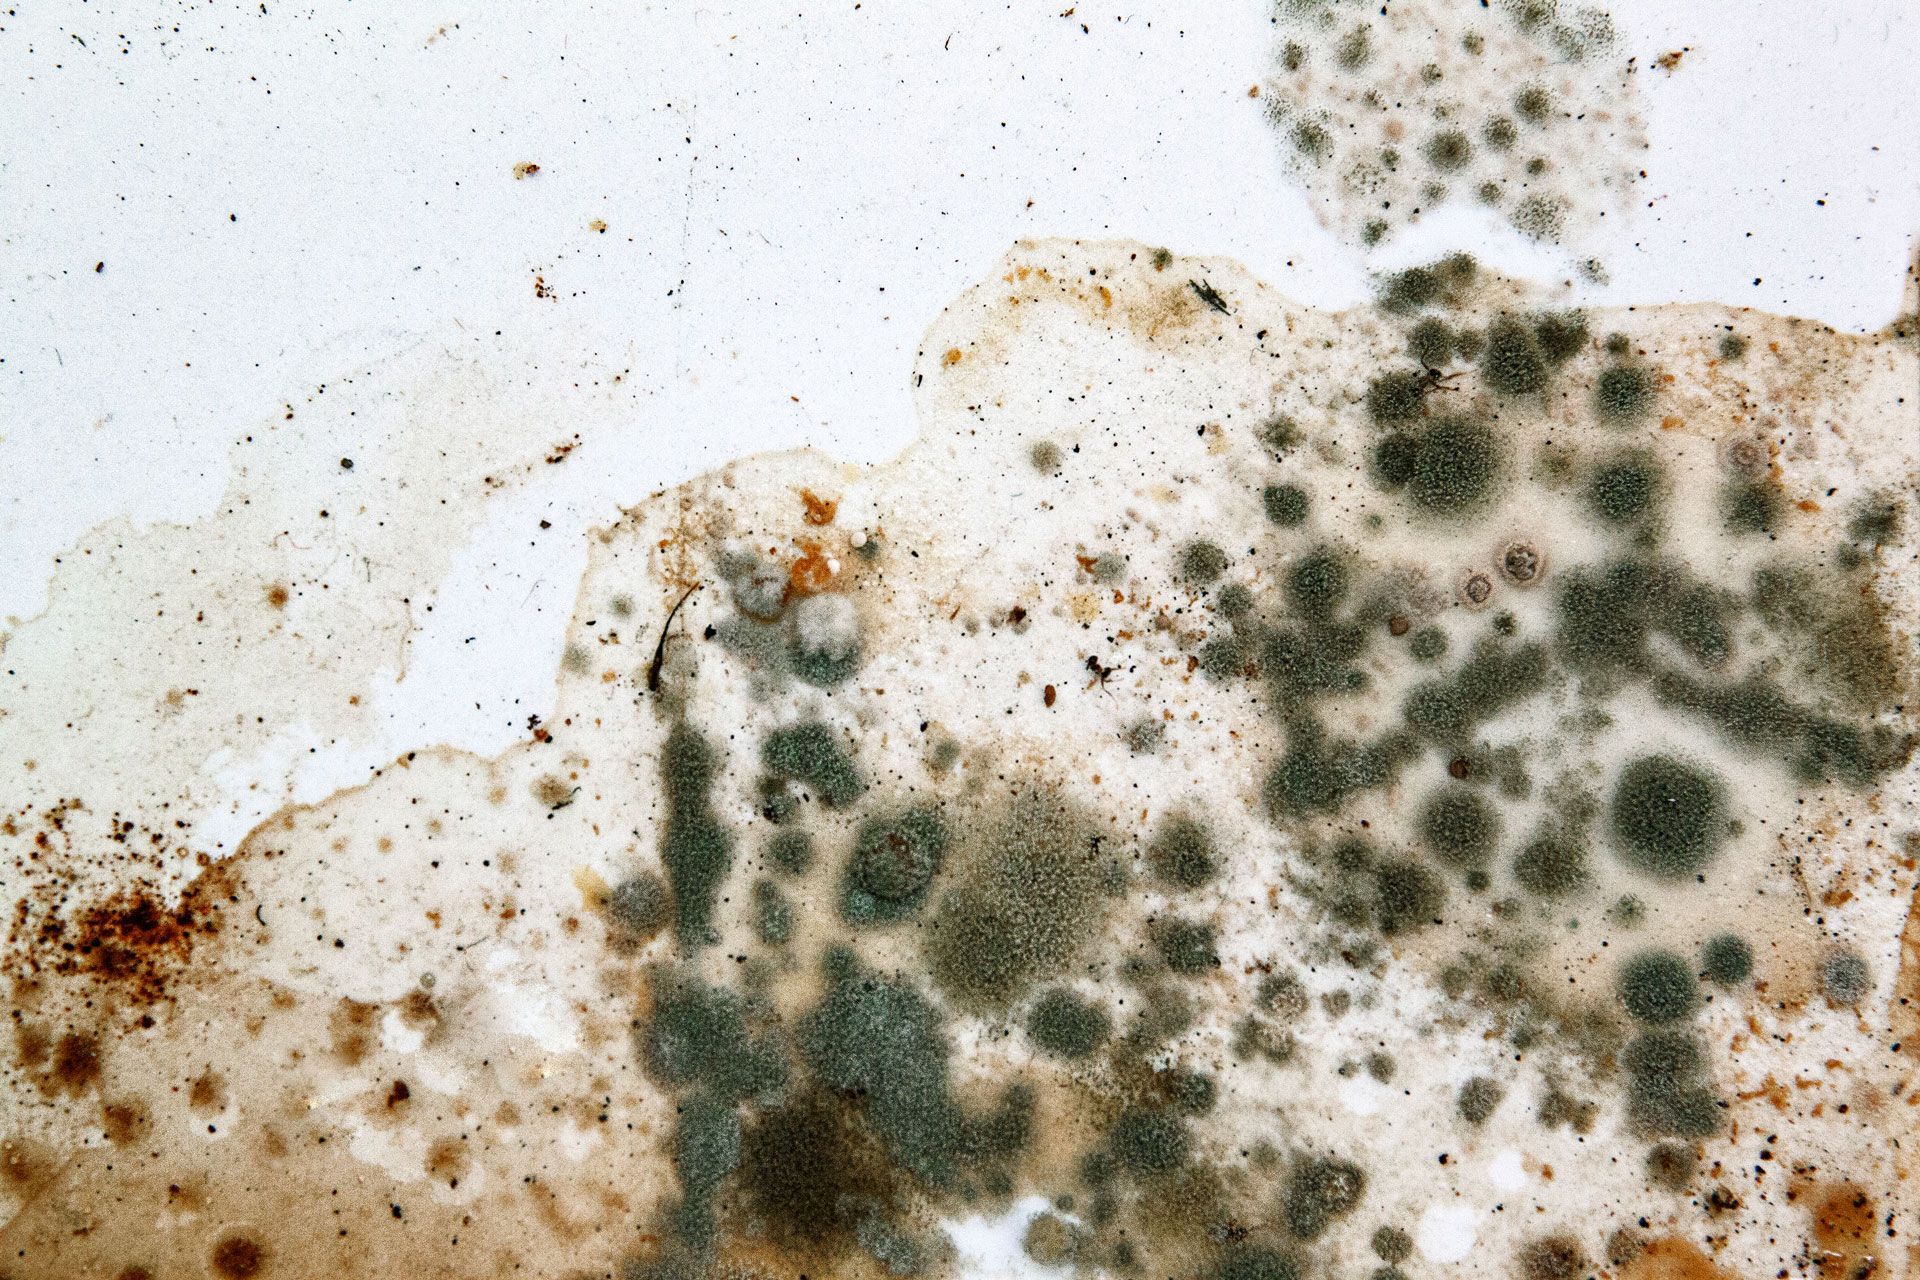 a close up of a white surface with black mold growing on it